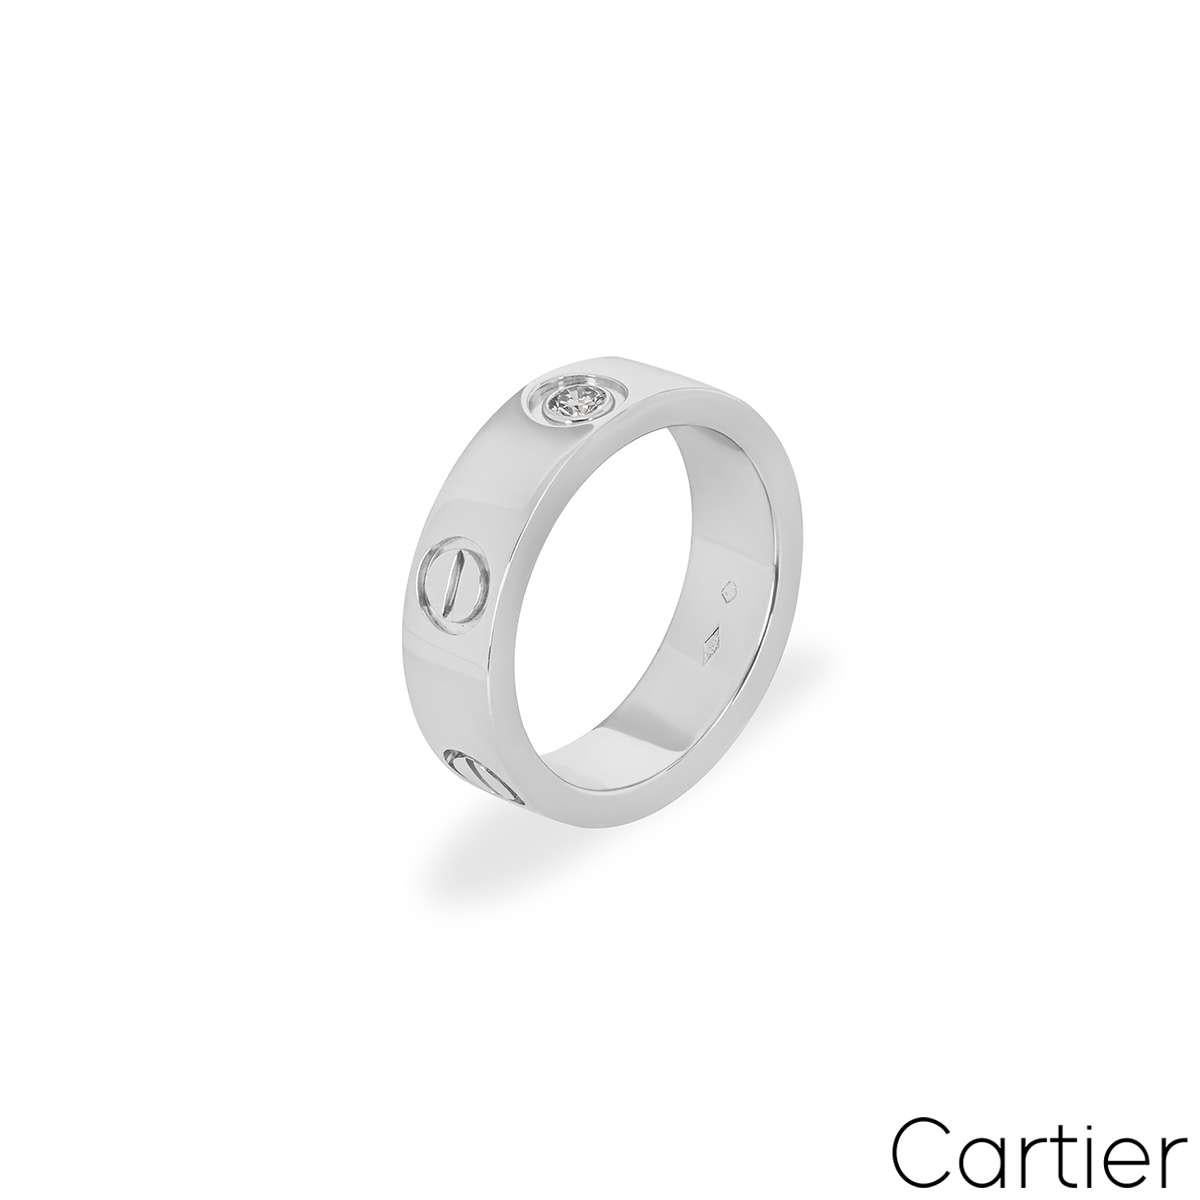 A Cartier diamond ring in platinum from the Love collection. The ring comprises of the iconic Cartier screws and a single round brilliant cut diamond set in the centre. Measuring 5.5mm in width, the ring is a size UK L - EU 51 and has a gross weight